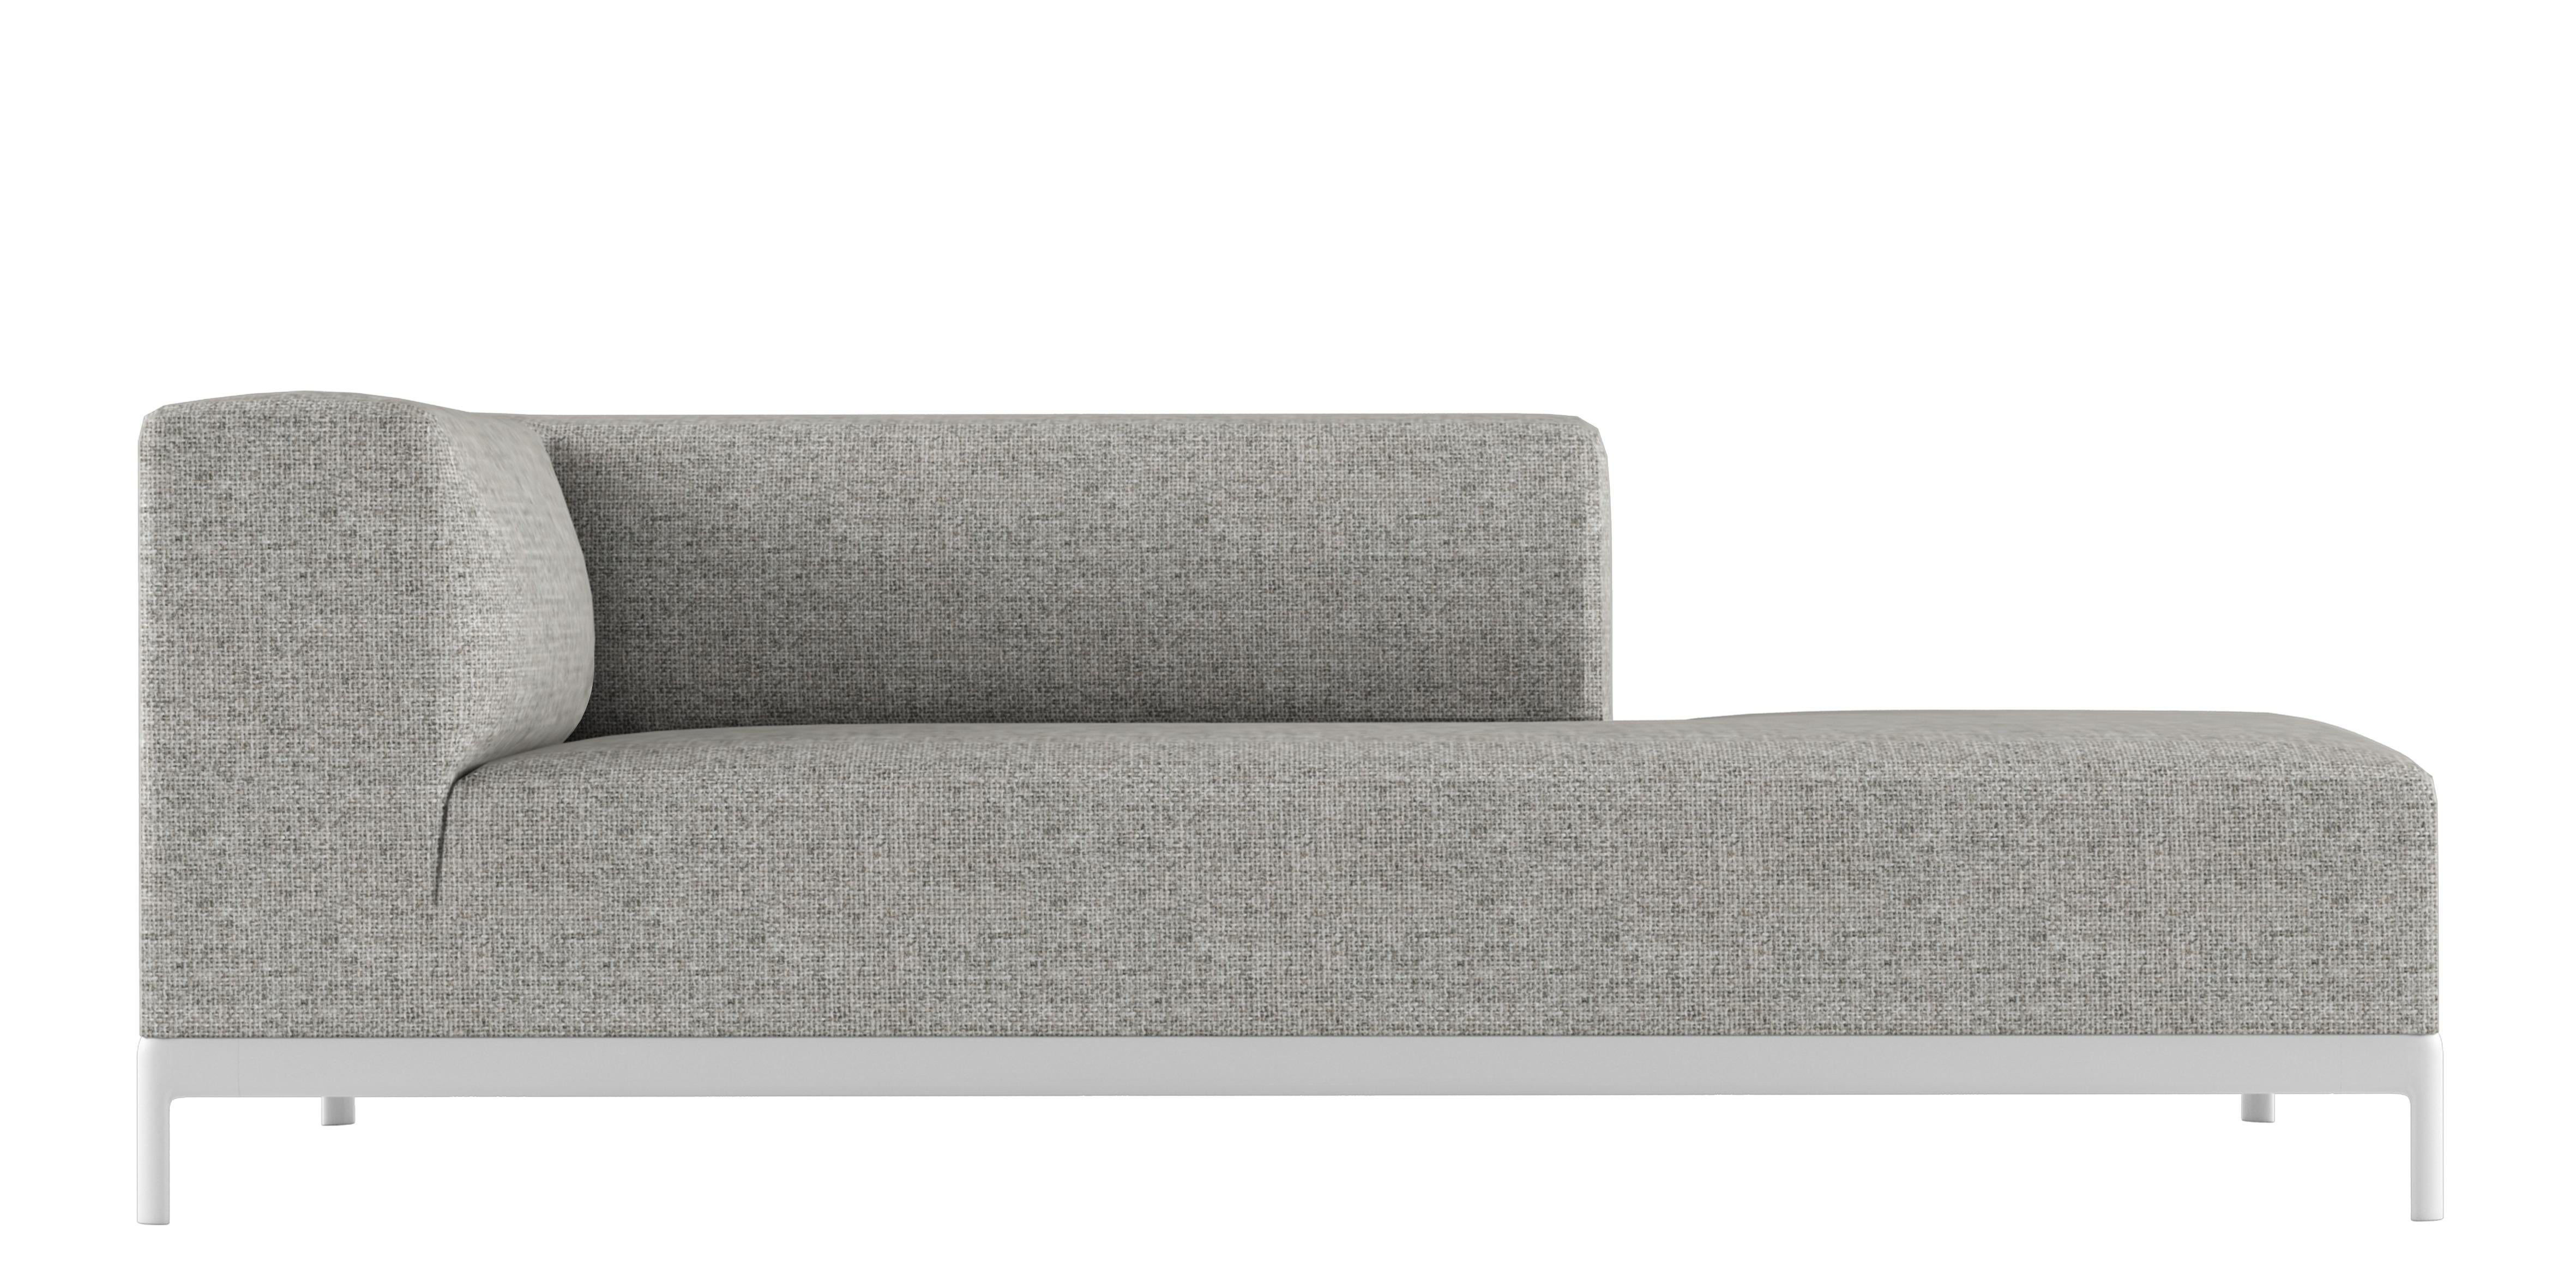 Alias P64 AluZen Outdoor DX Soft Angular Sofa in Upholstery with Aluminium Frame by Ludovica & Roberto Palomba

Modular corner element for outdoor use with structure in lacquered aluminium.Seat, back and armrest with removable cover in fabric or